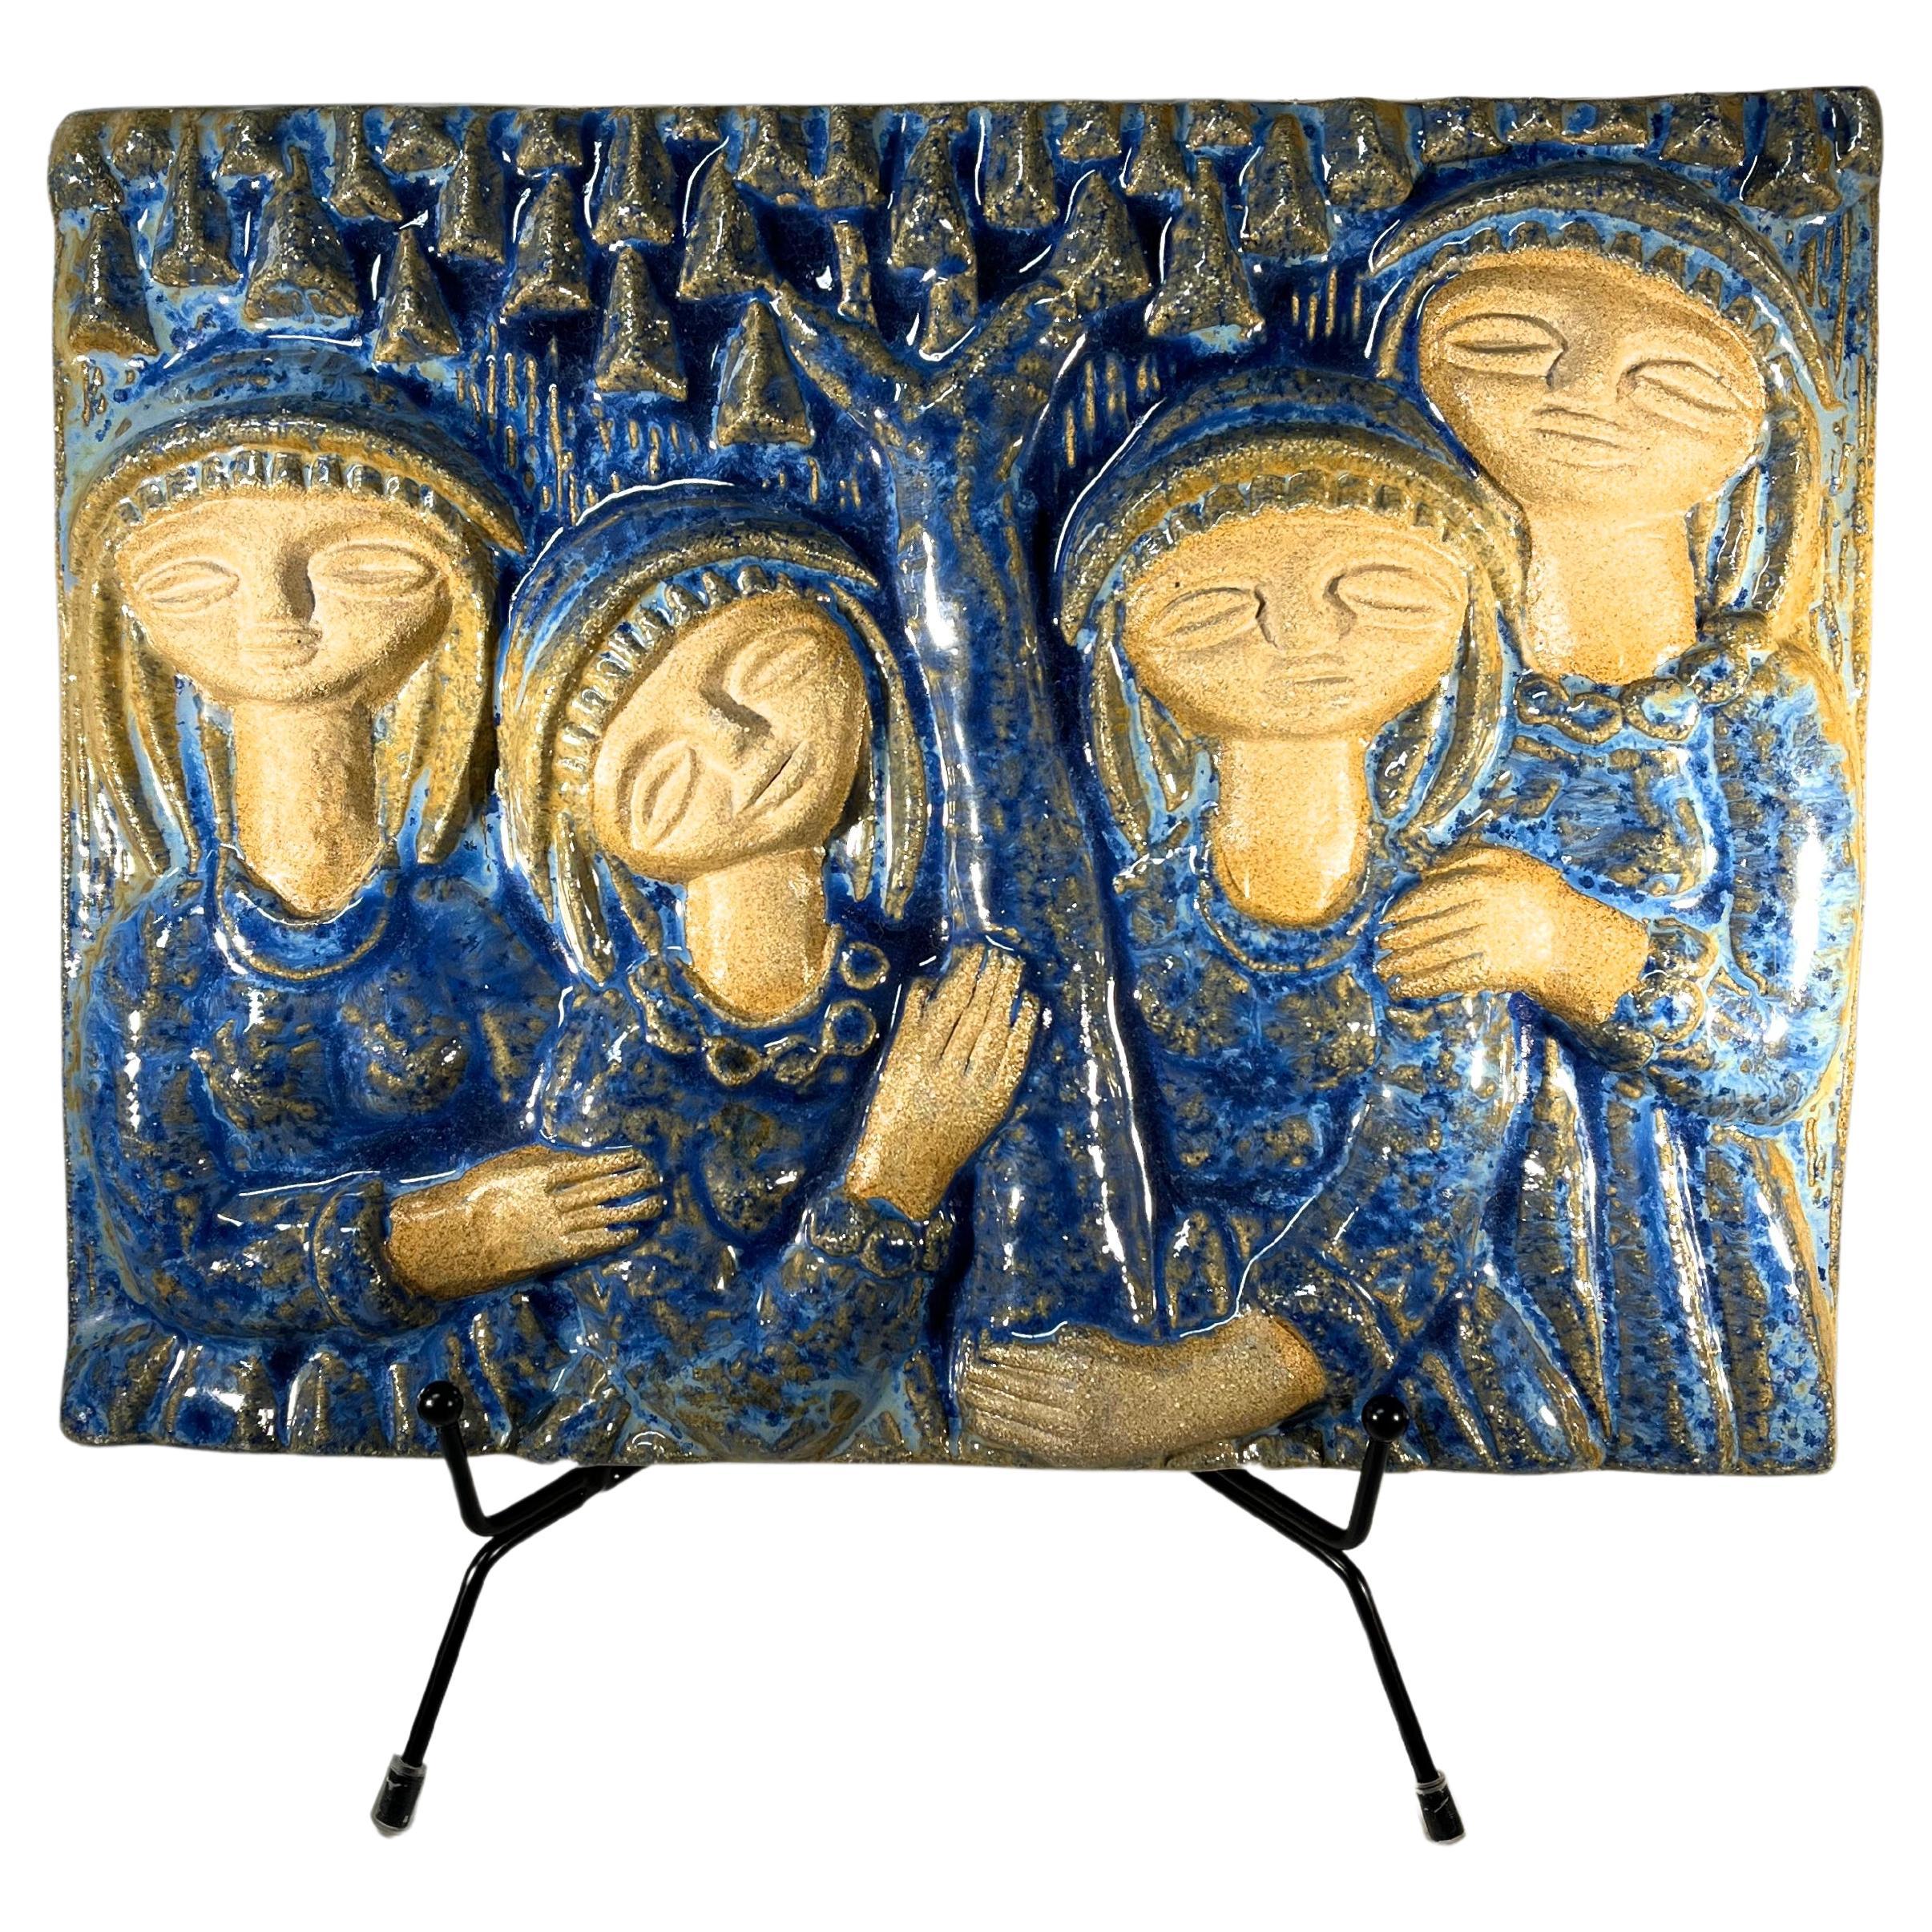 Blue Ladies By Marianne Starck For Michael Andersen. Danish Wall Plaque For Sale